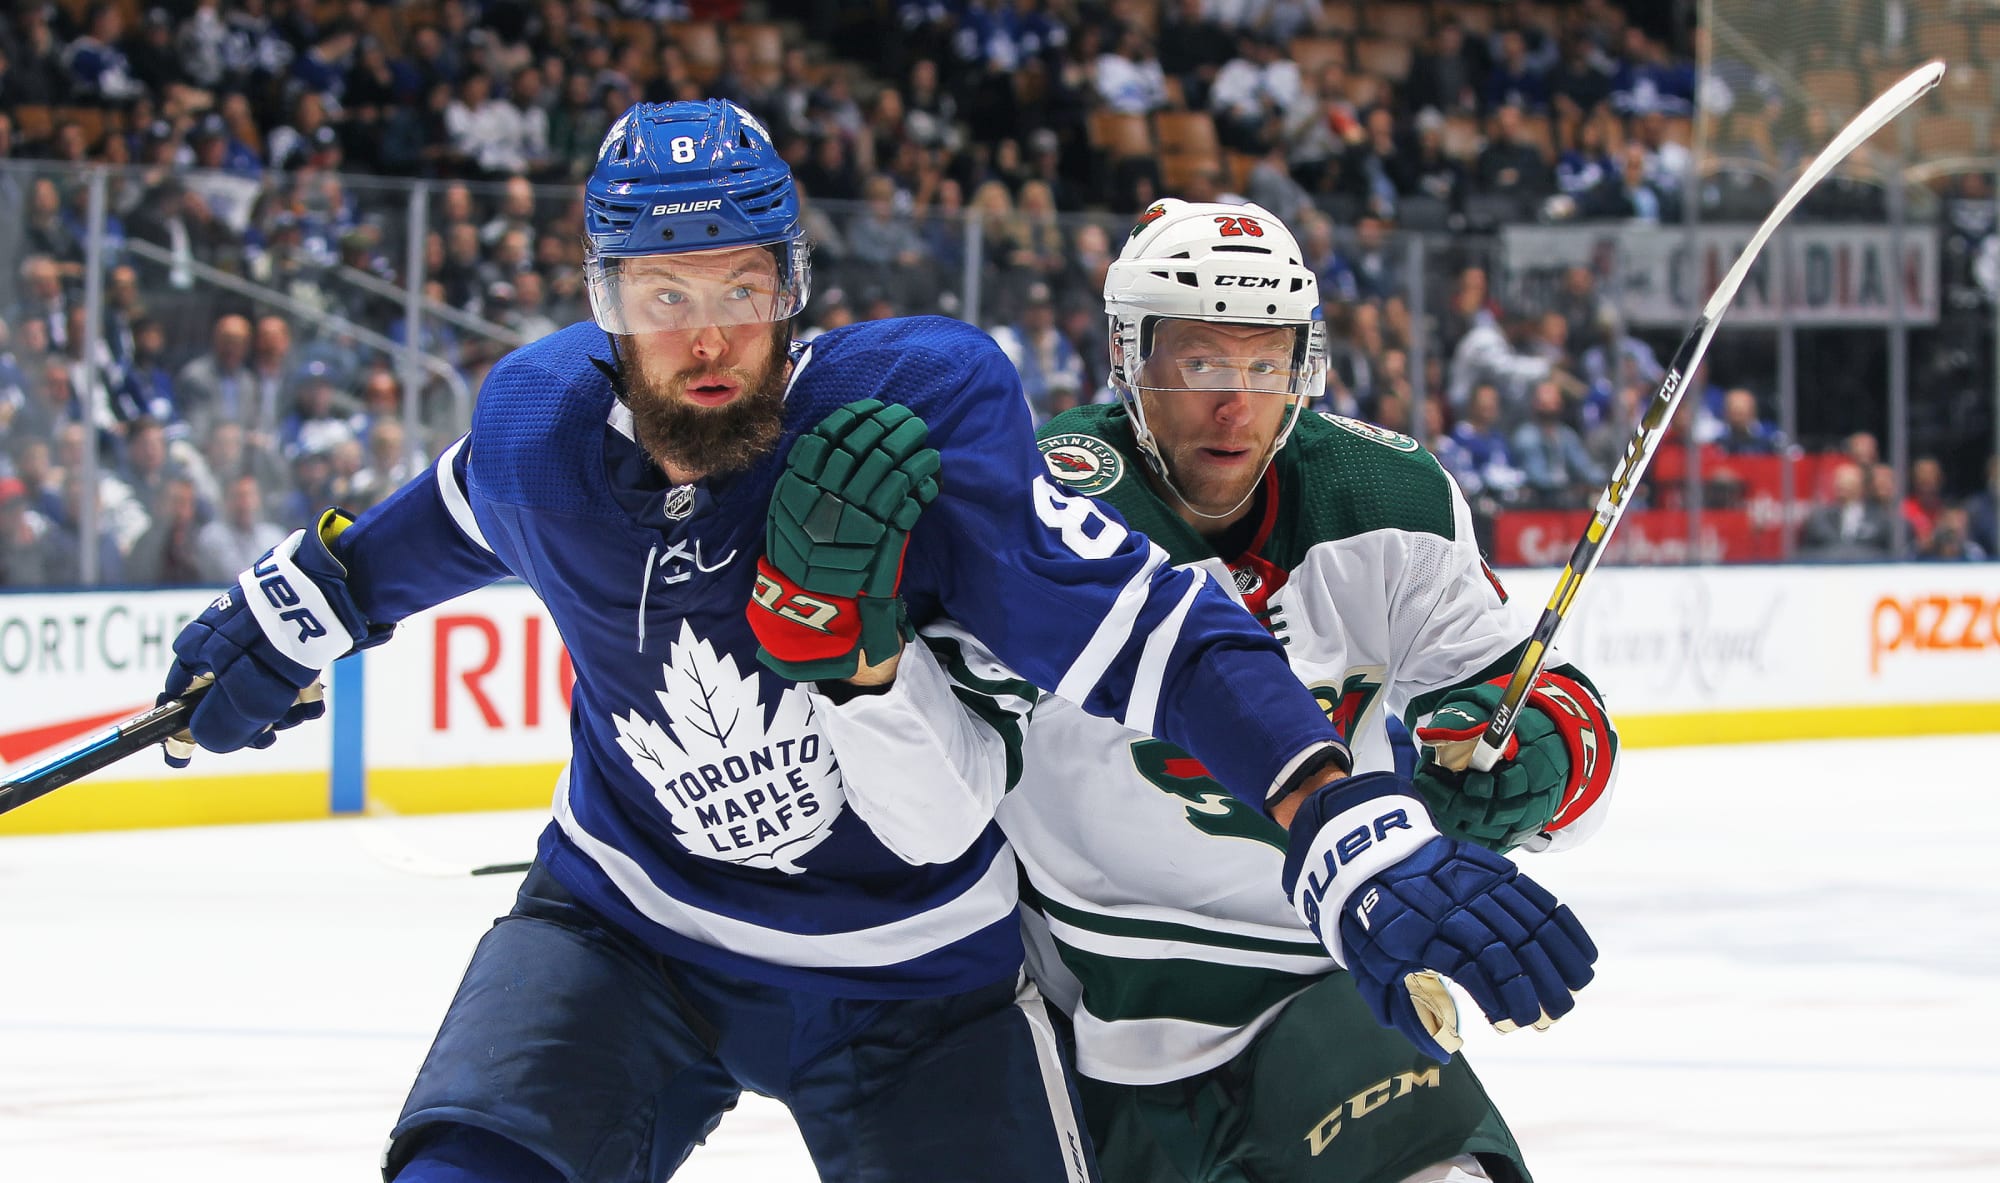 Minnesota Wild: Being disinterested in William Nylander is a good